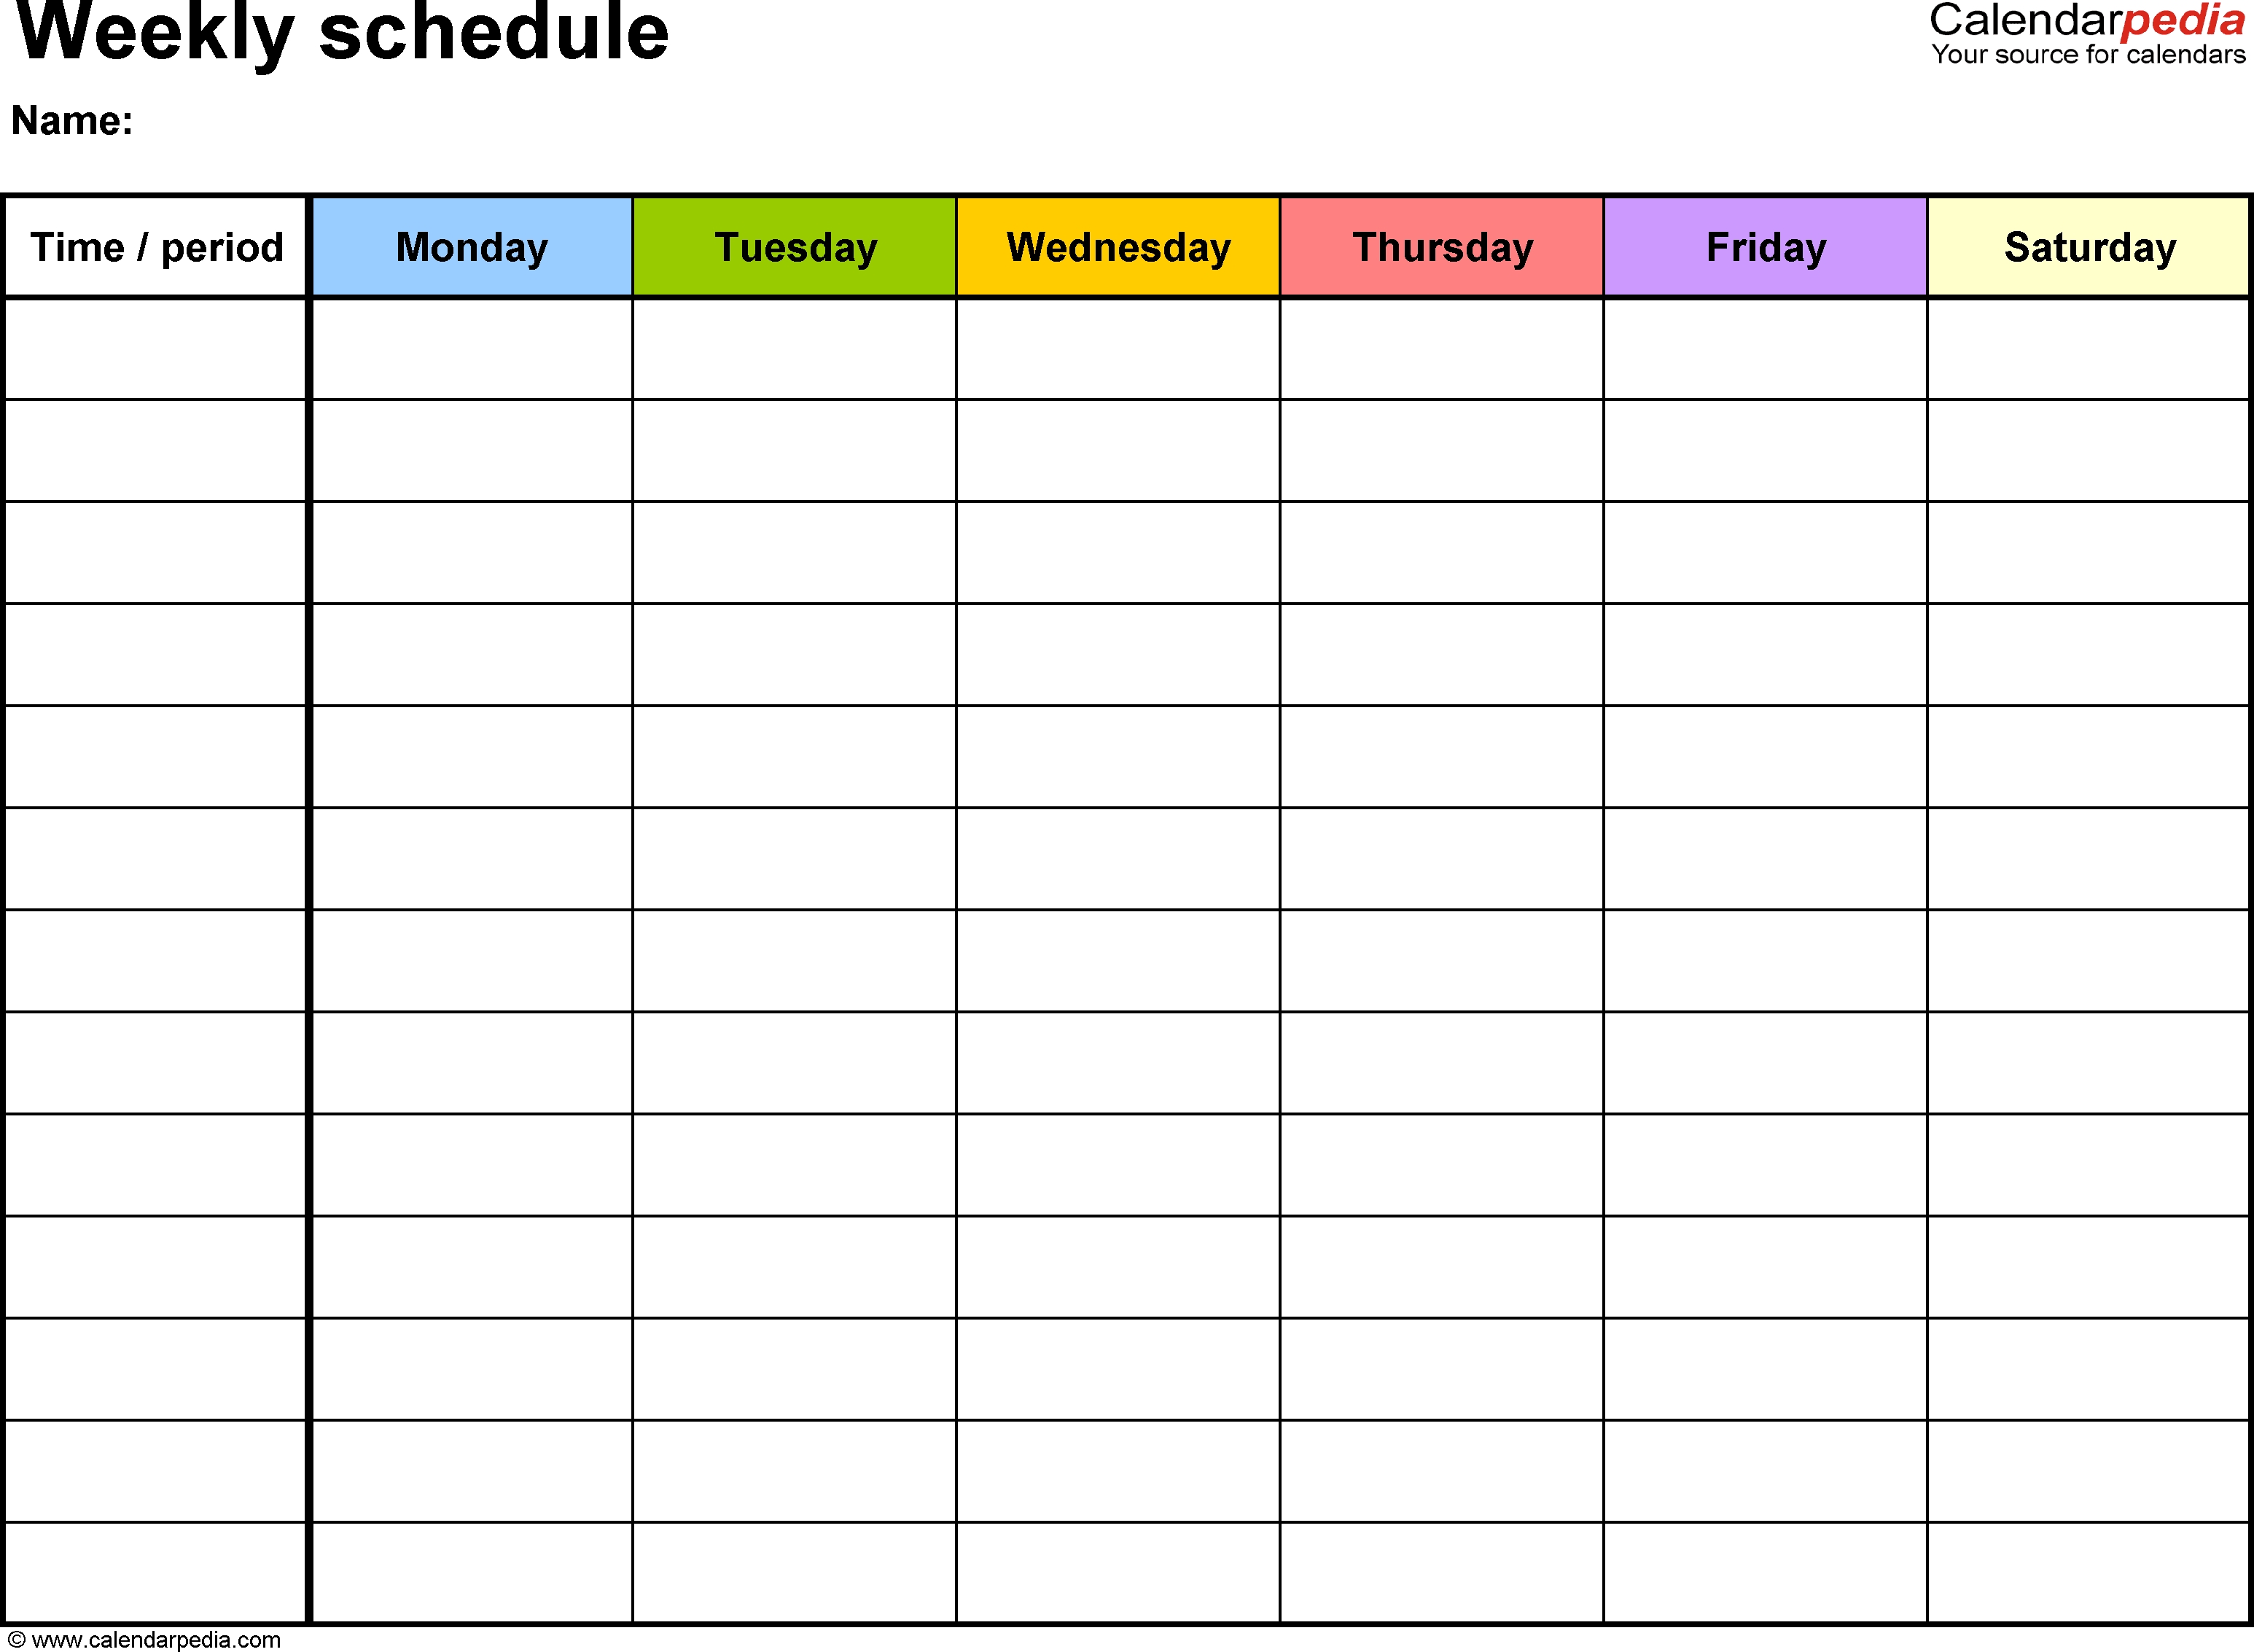 Free Weekly Schedule Templates For Word - 18 Templates with regard to Blank Weekly Calendar With Times